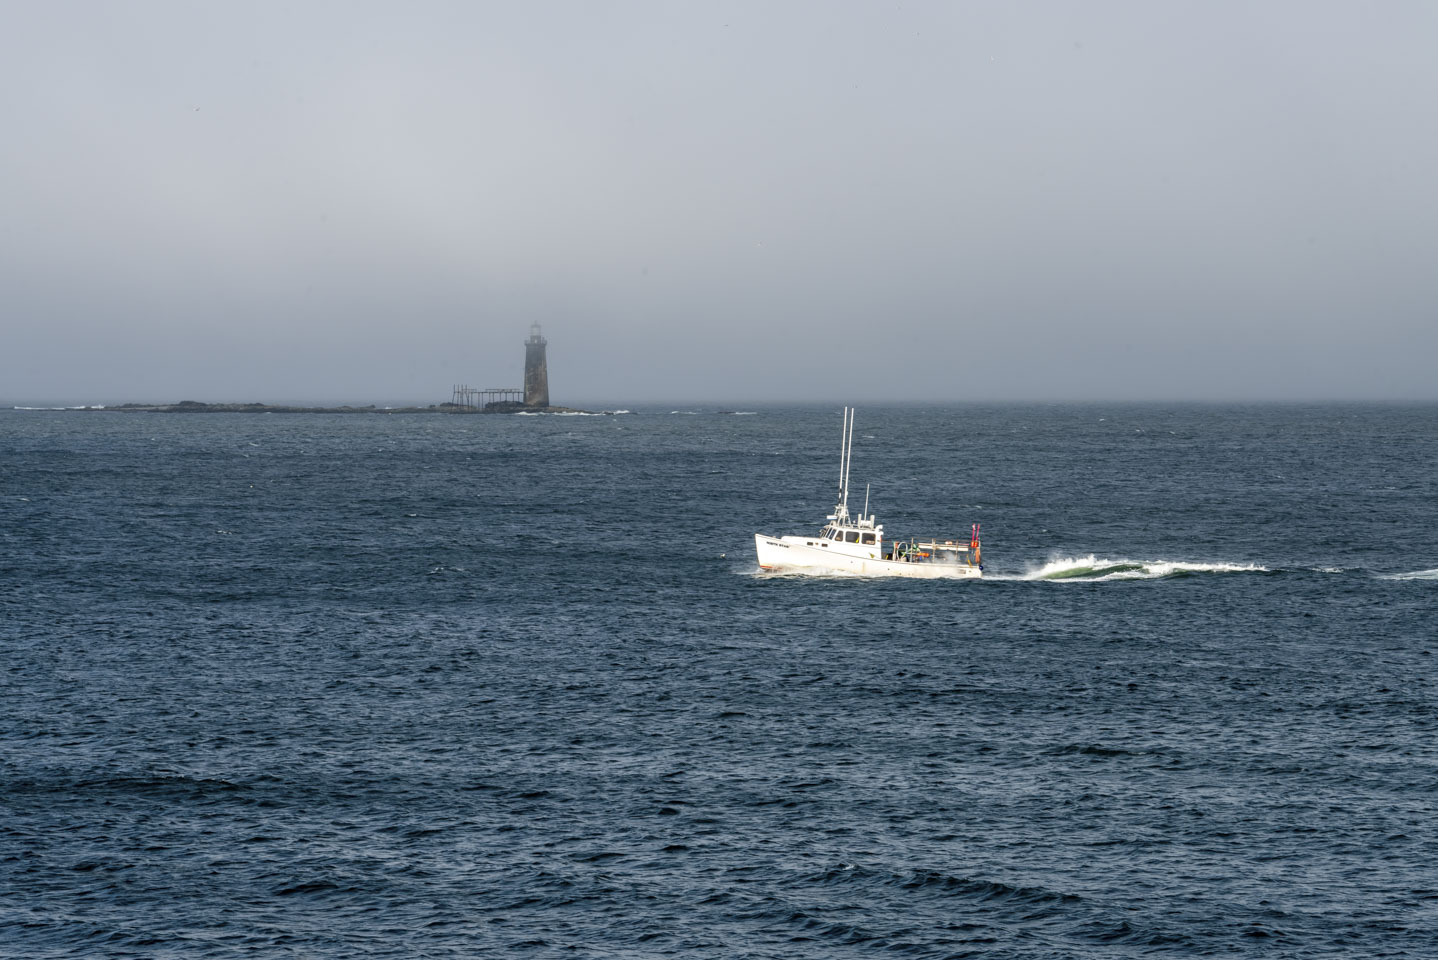 Ram Island Ledge light with a boat in front